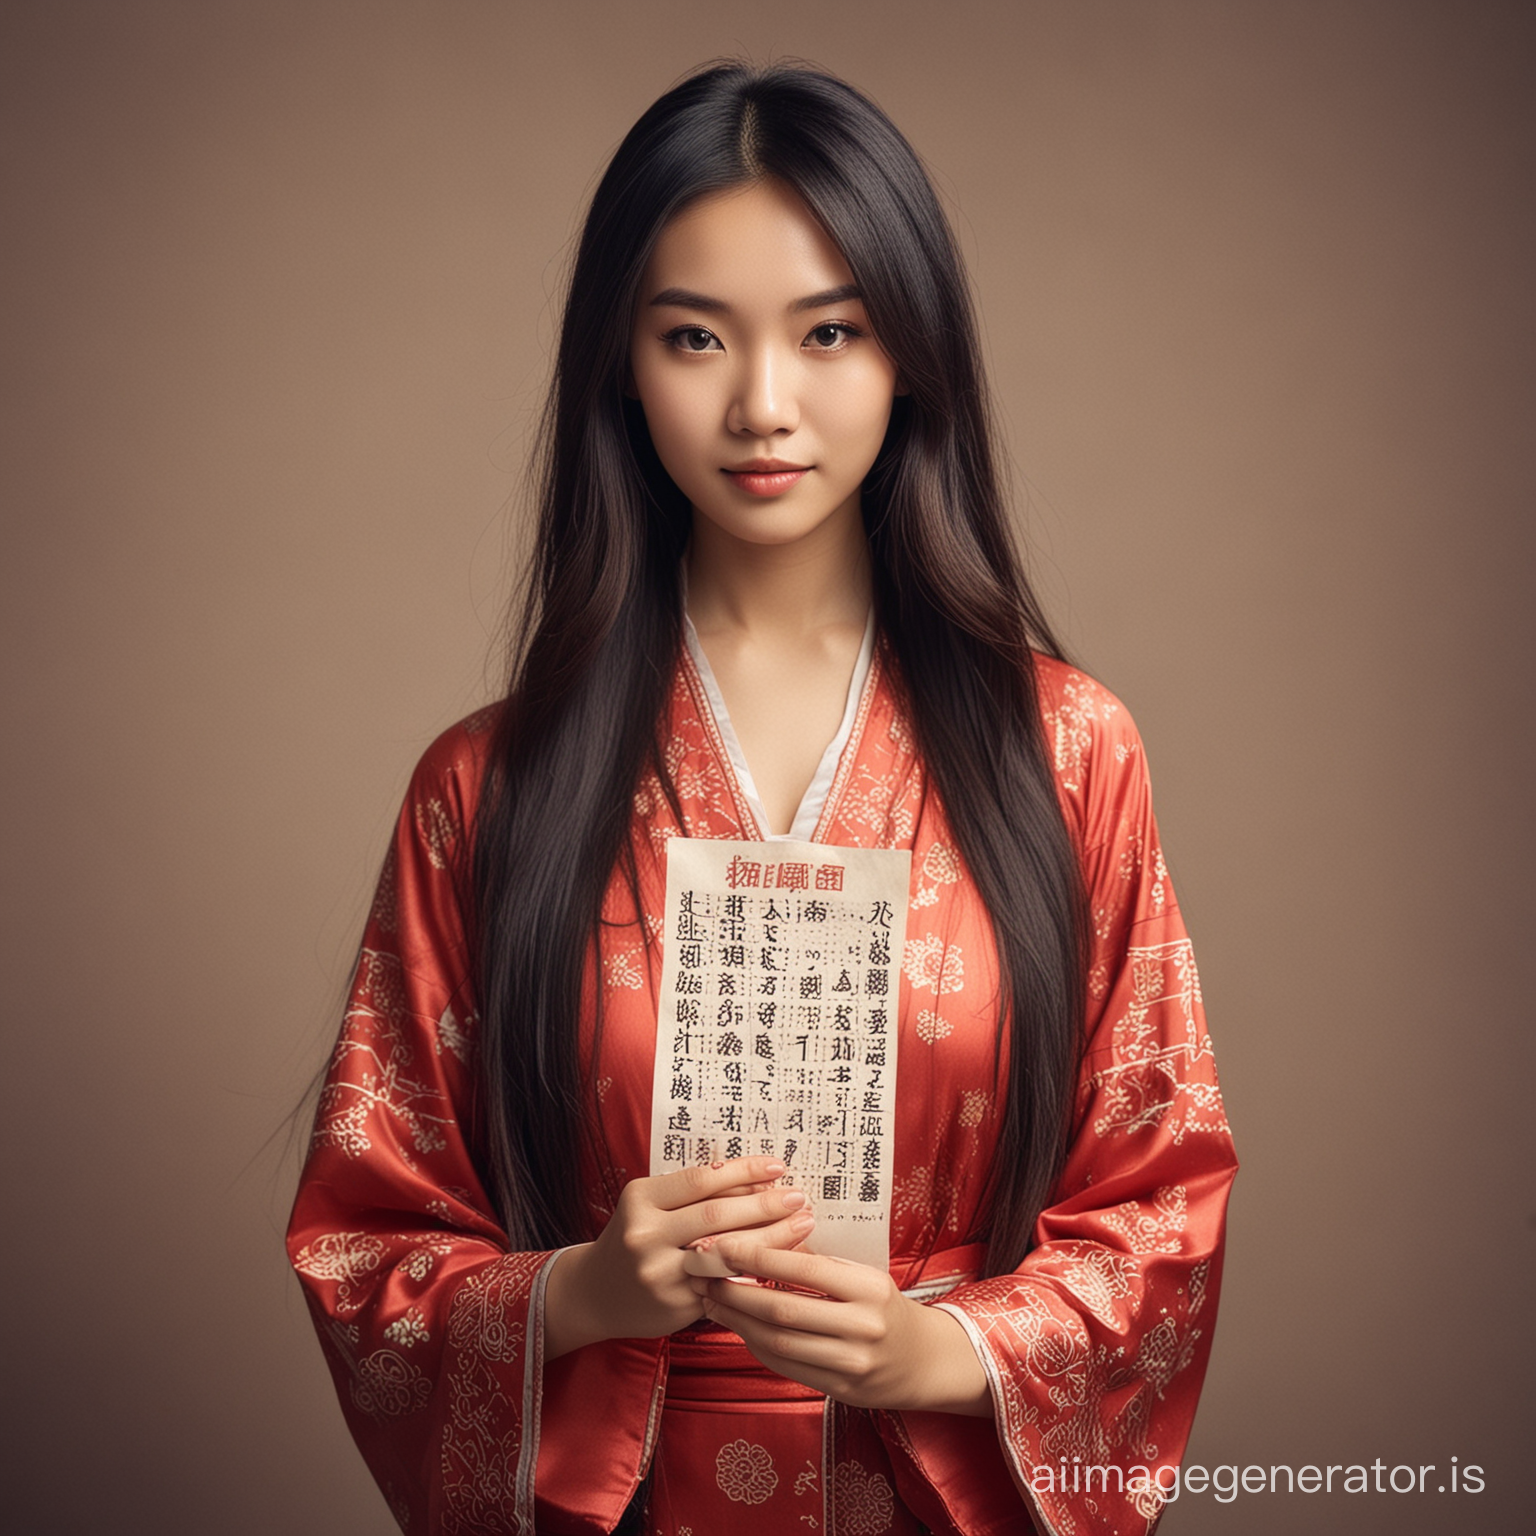 Young female fortune teller, Chinese, beautiful, long hair, holding a piece of paper with the words "Weekly Horoscope" in her hand.